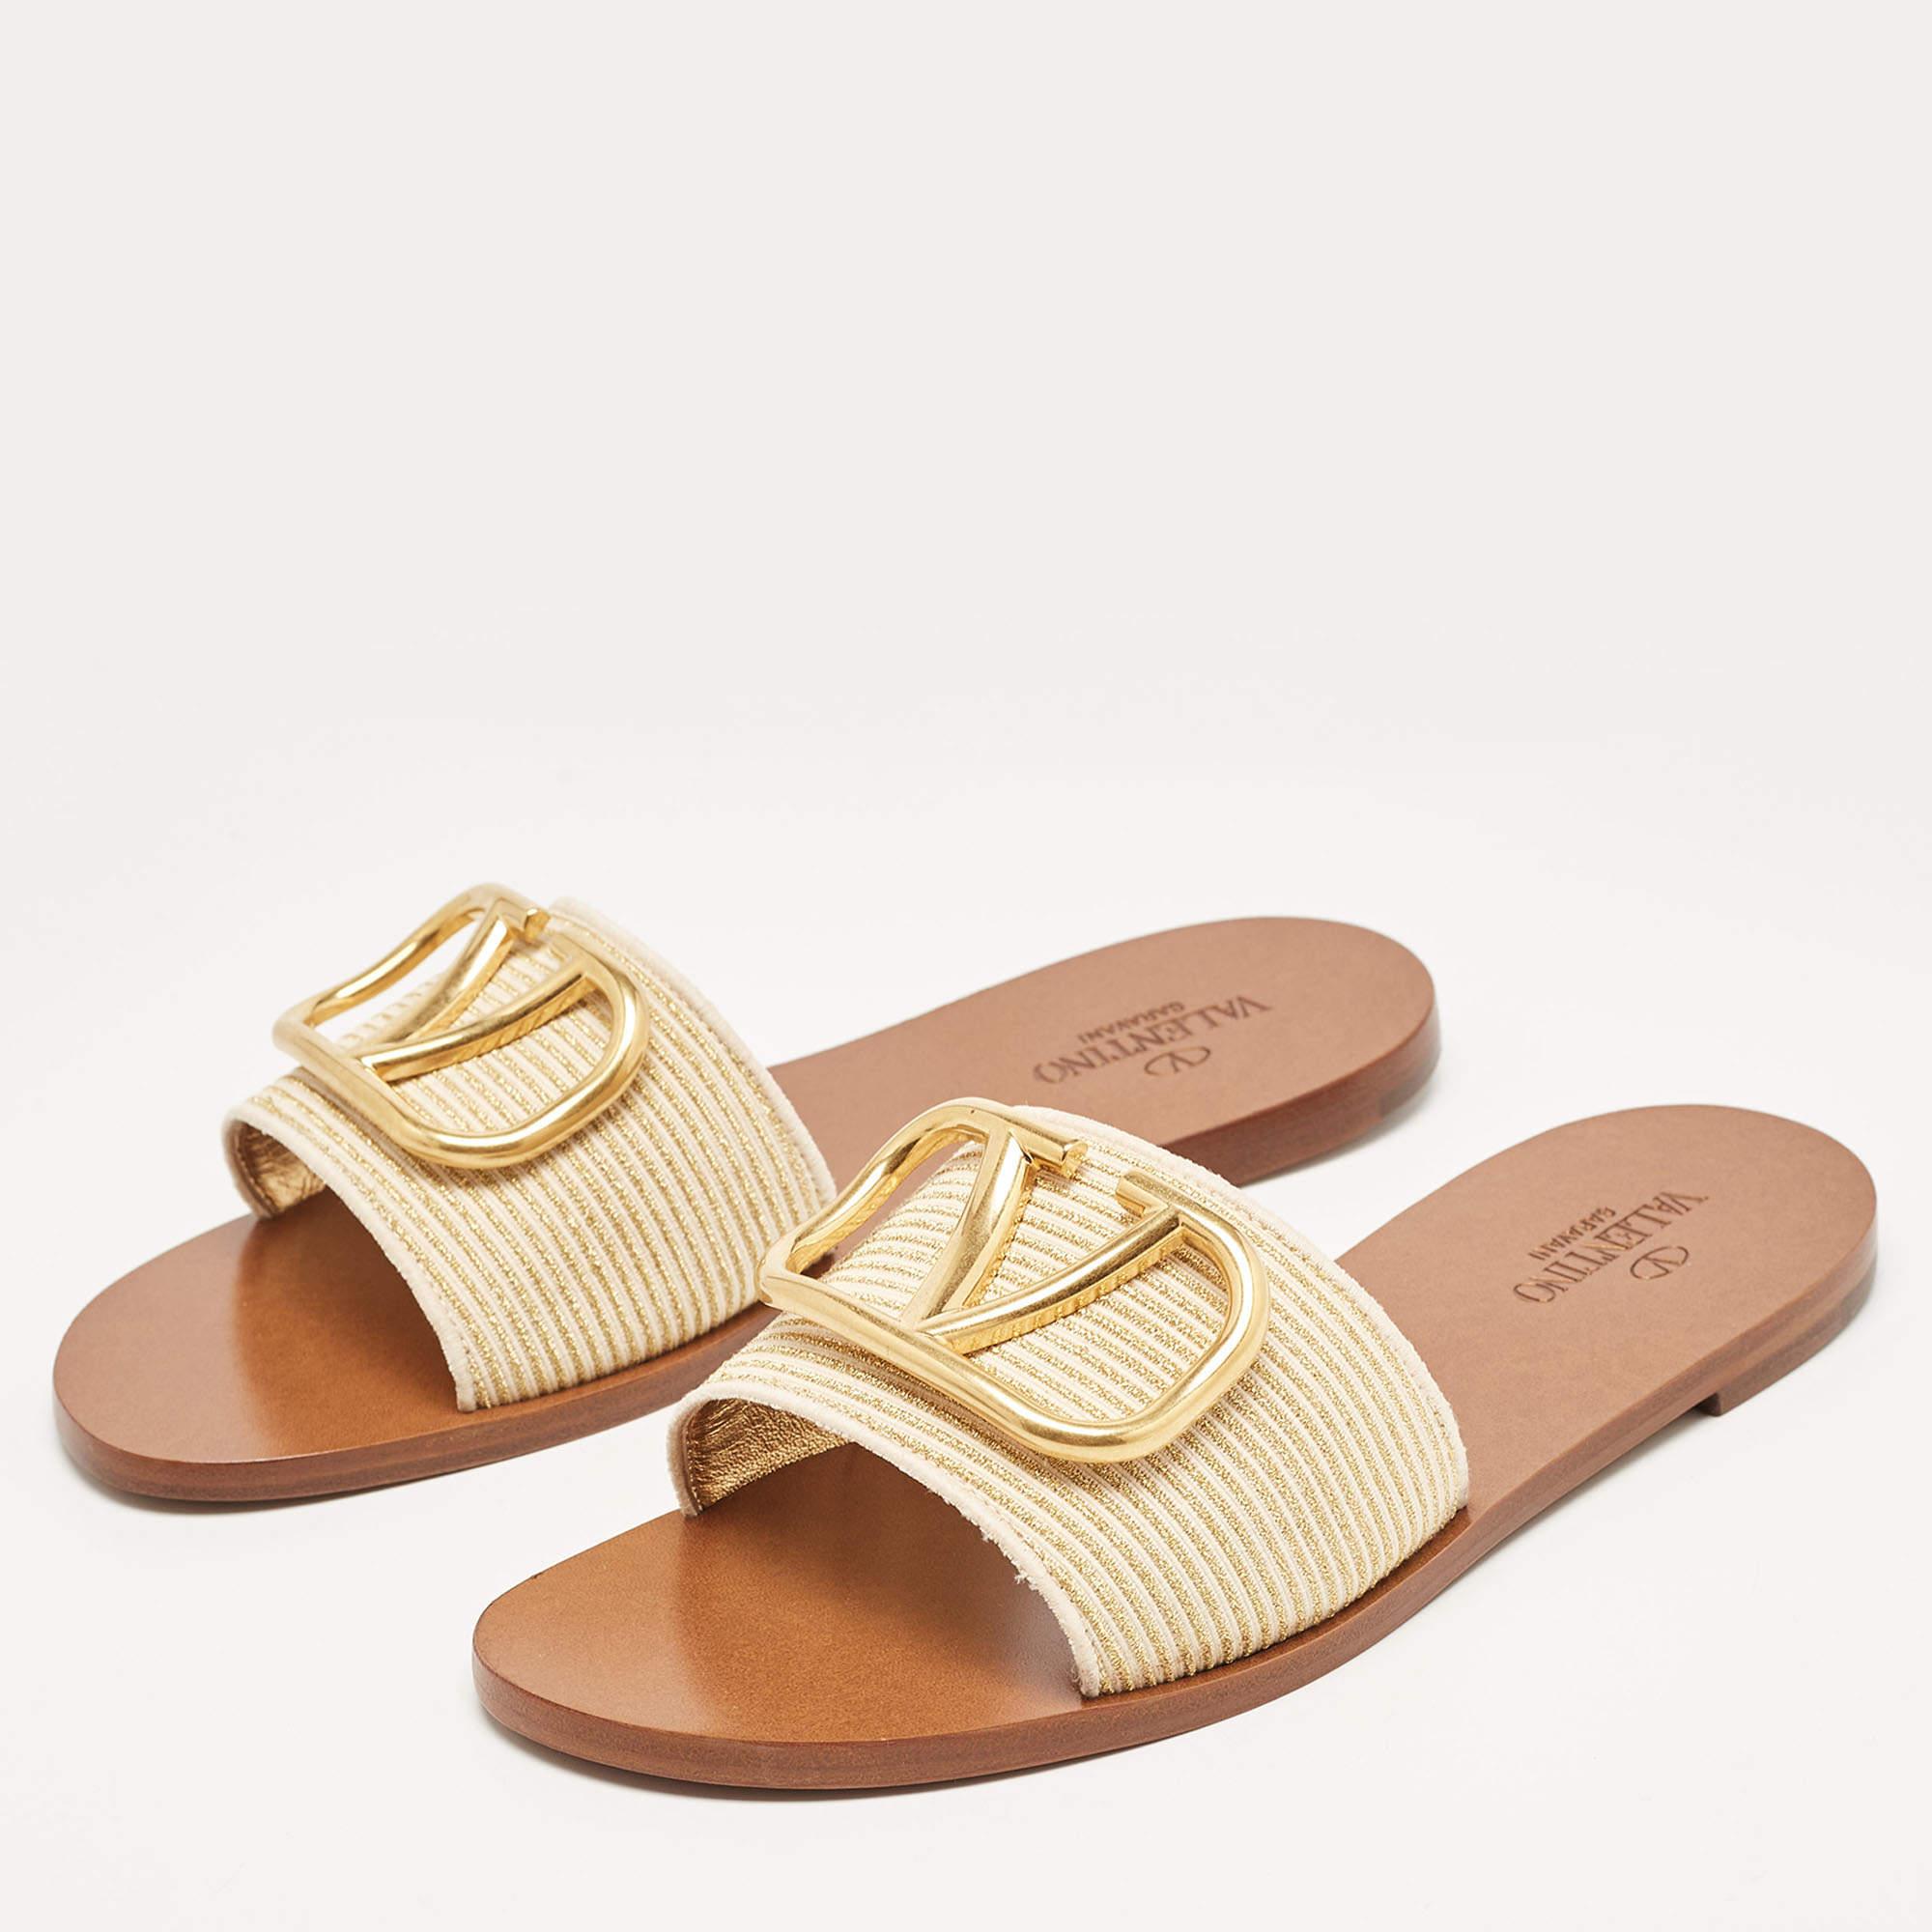 Complete your look by adding these Valentino VLogo flat slides to your lovely wardrobe. They are crafted skilfully to grant the perfect fit and style.

Includes: Original Dustbag, Original Box, Info Booklet